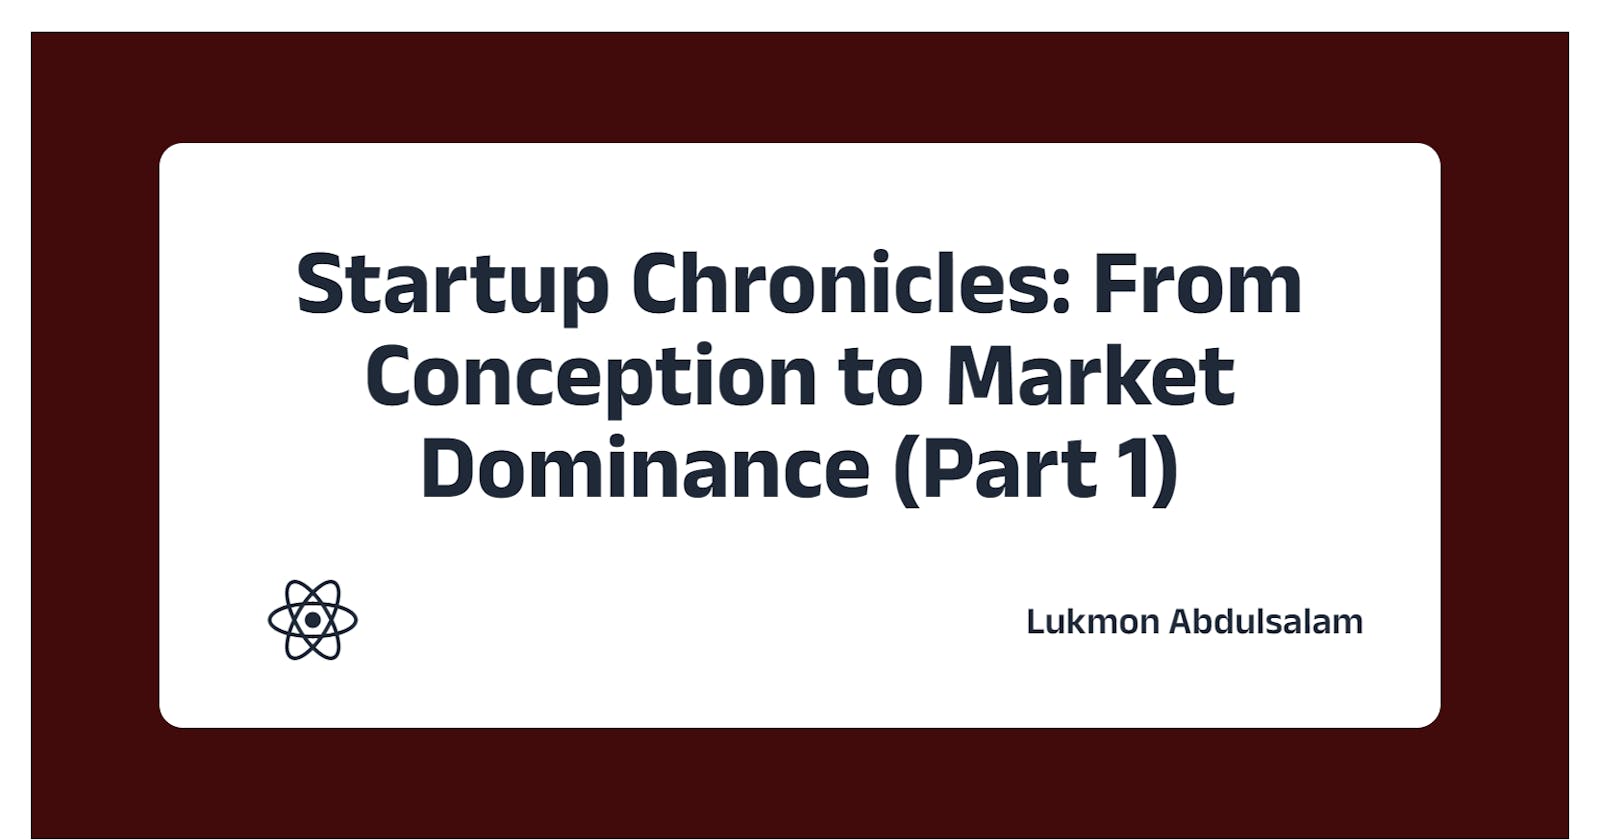 Startup Chronicles: From Conception to Market Dominance (Part 1)